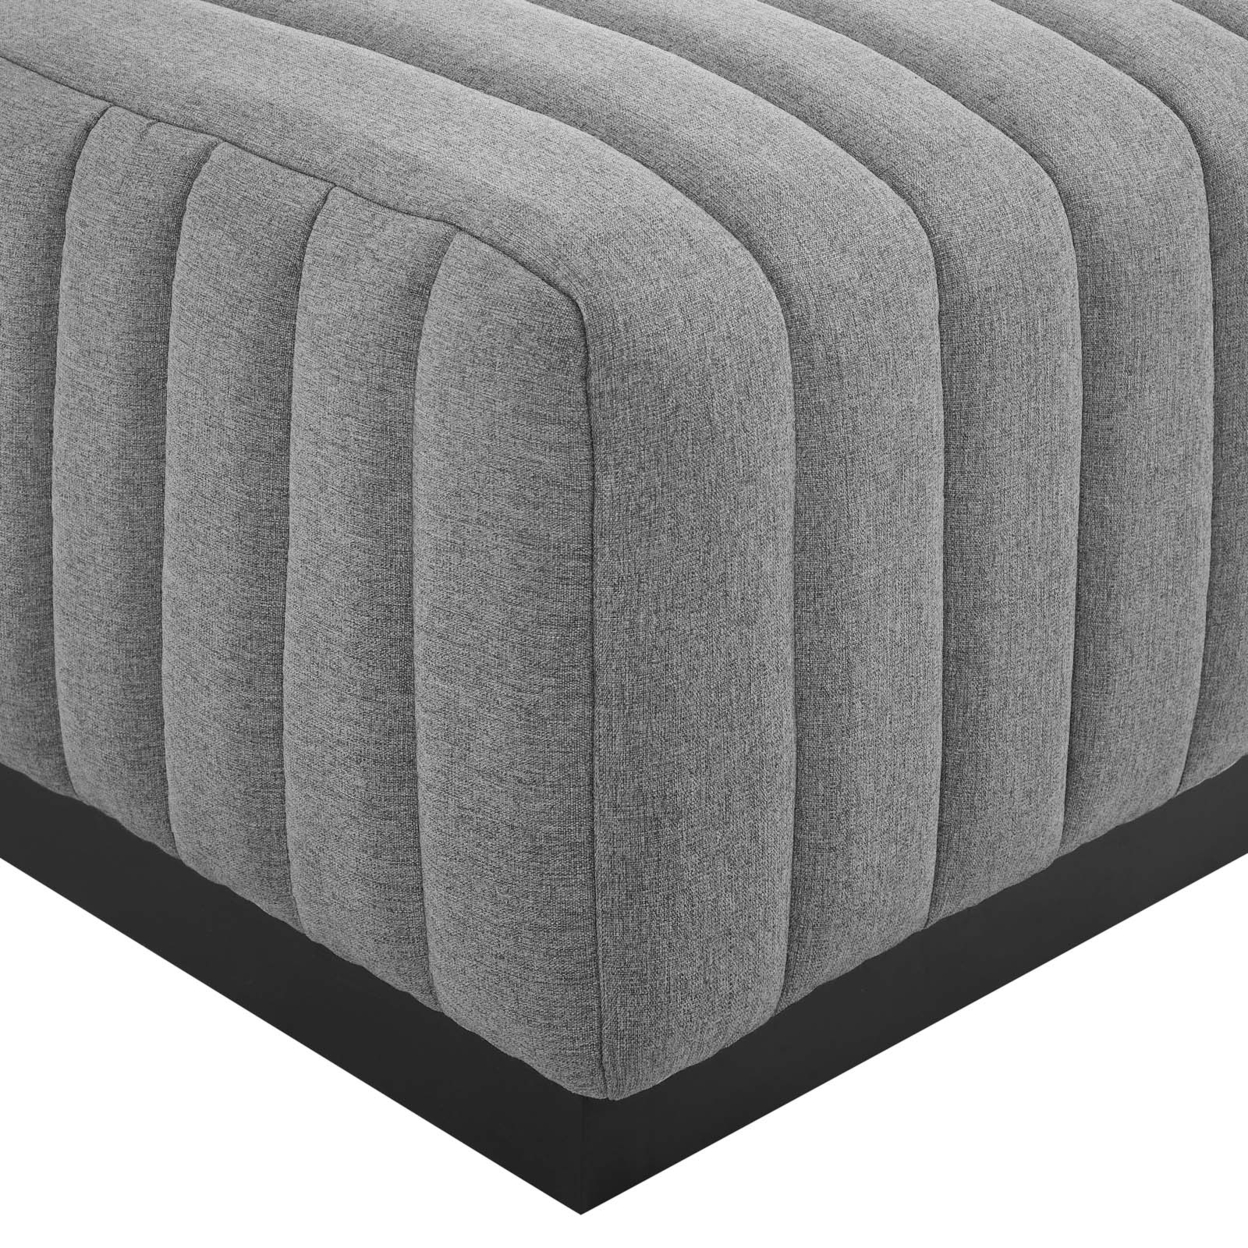 Conjure Channel Tufted Upholstered Fabric Ottoman, Black Light Gray